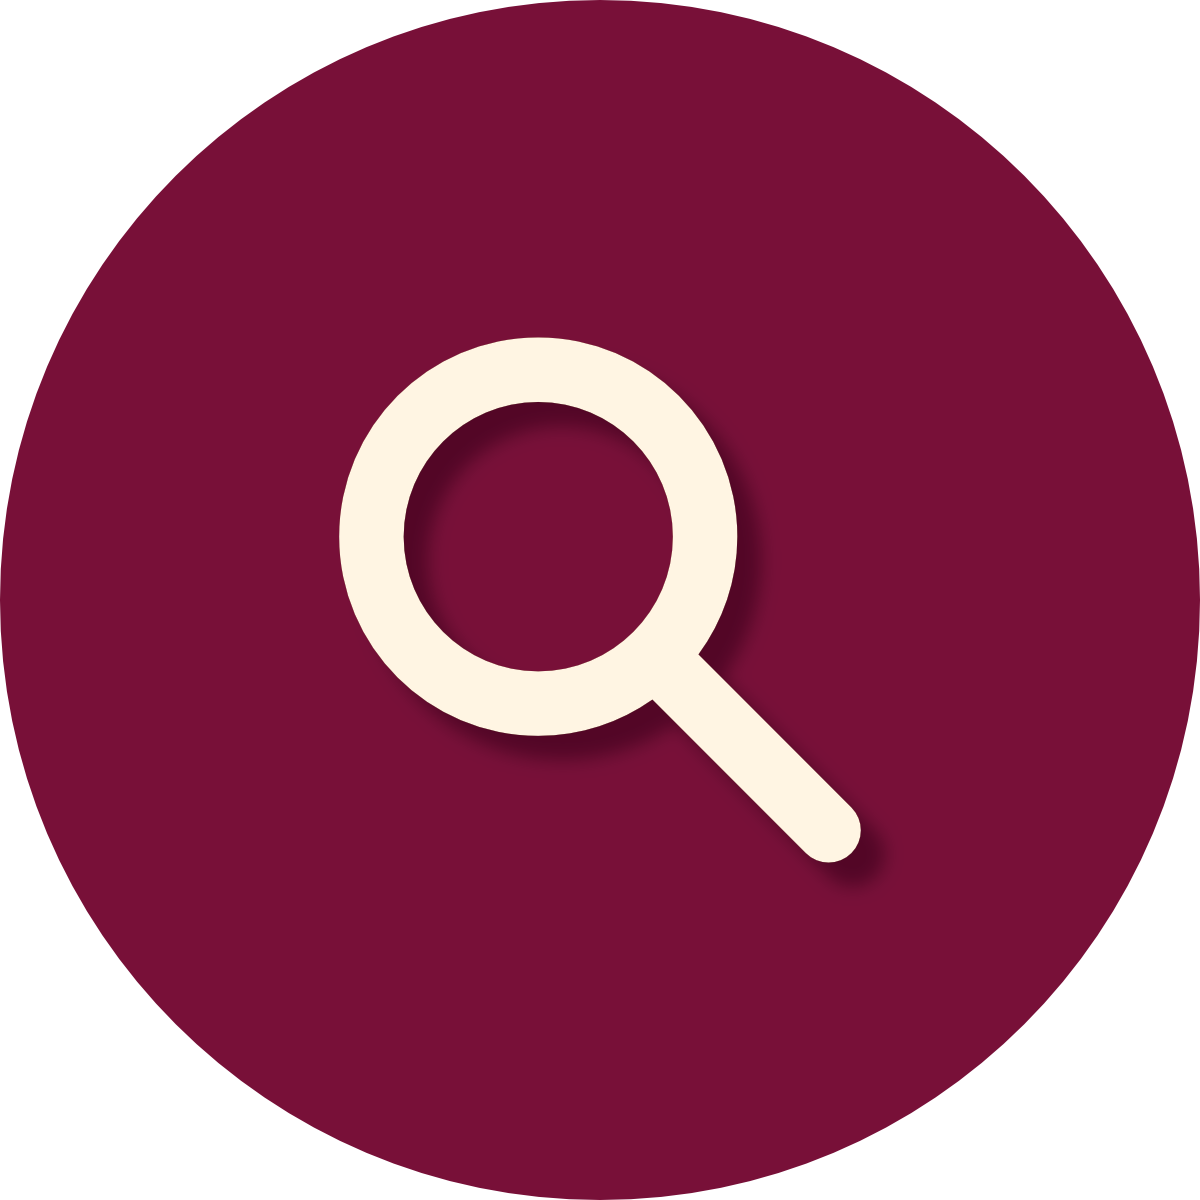 Discovery icon showing a magnifying glass